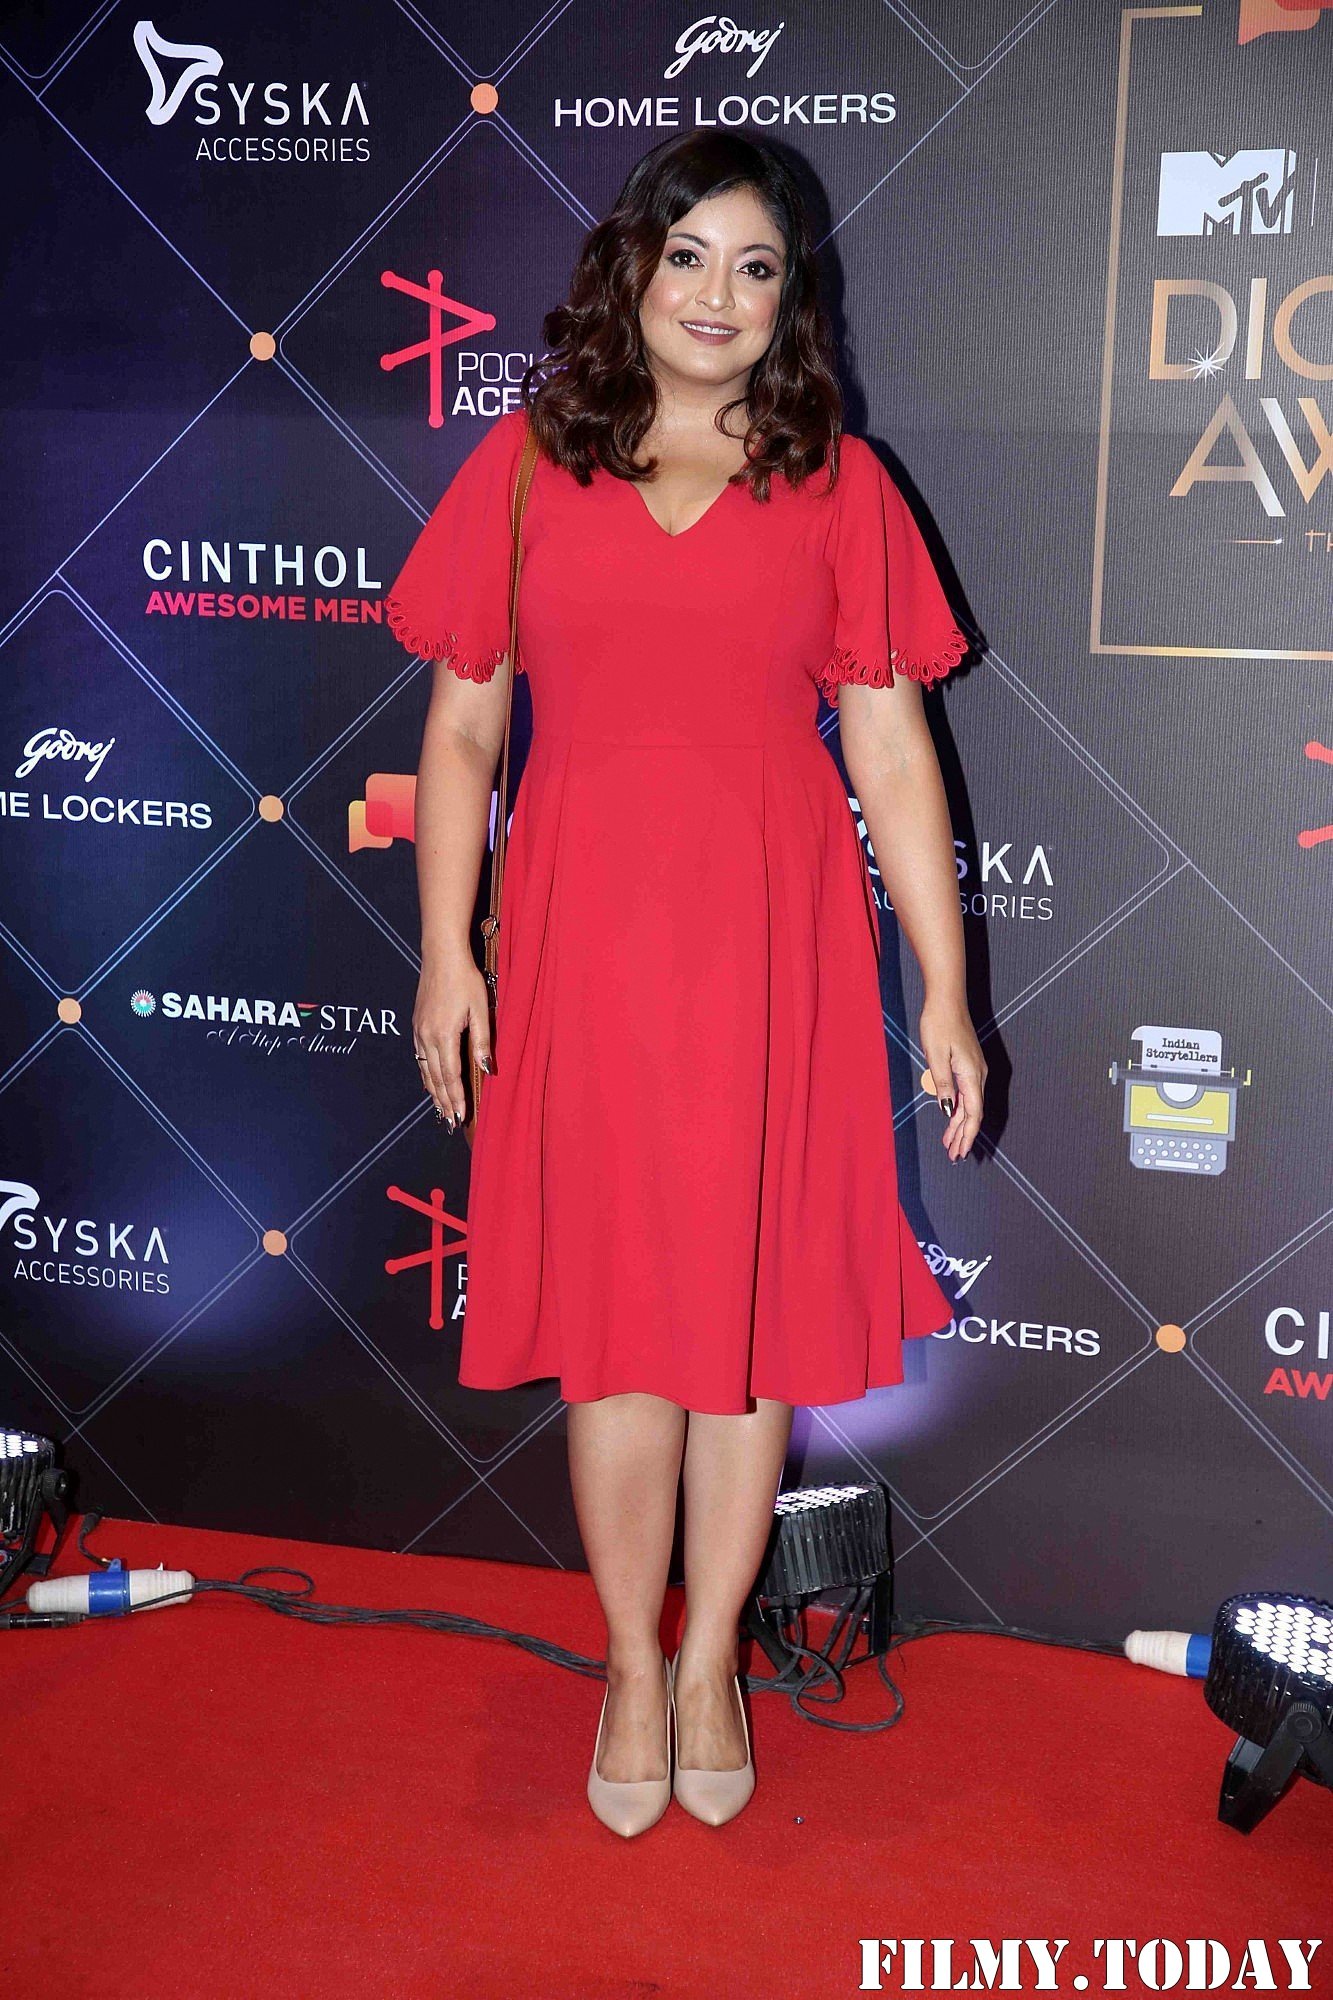 Tanushree Dutta - Photos: Red Carpet For The 2nd Edition Of MTV IWMBuzz Digital Awards | Picture 1698165